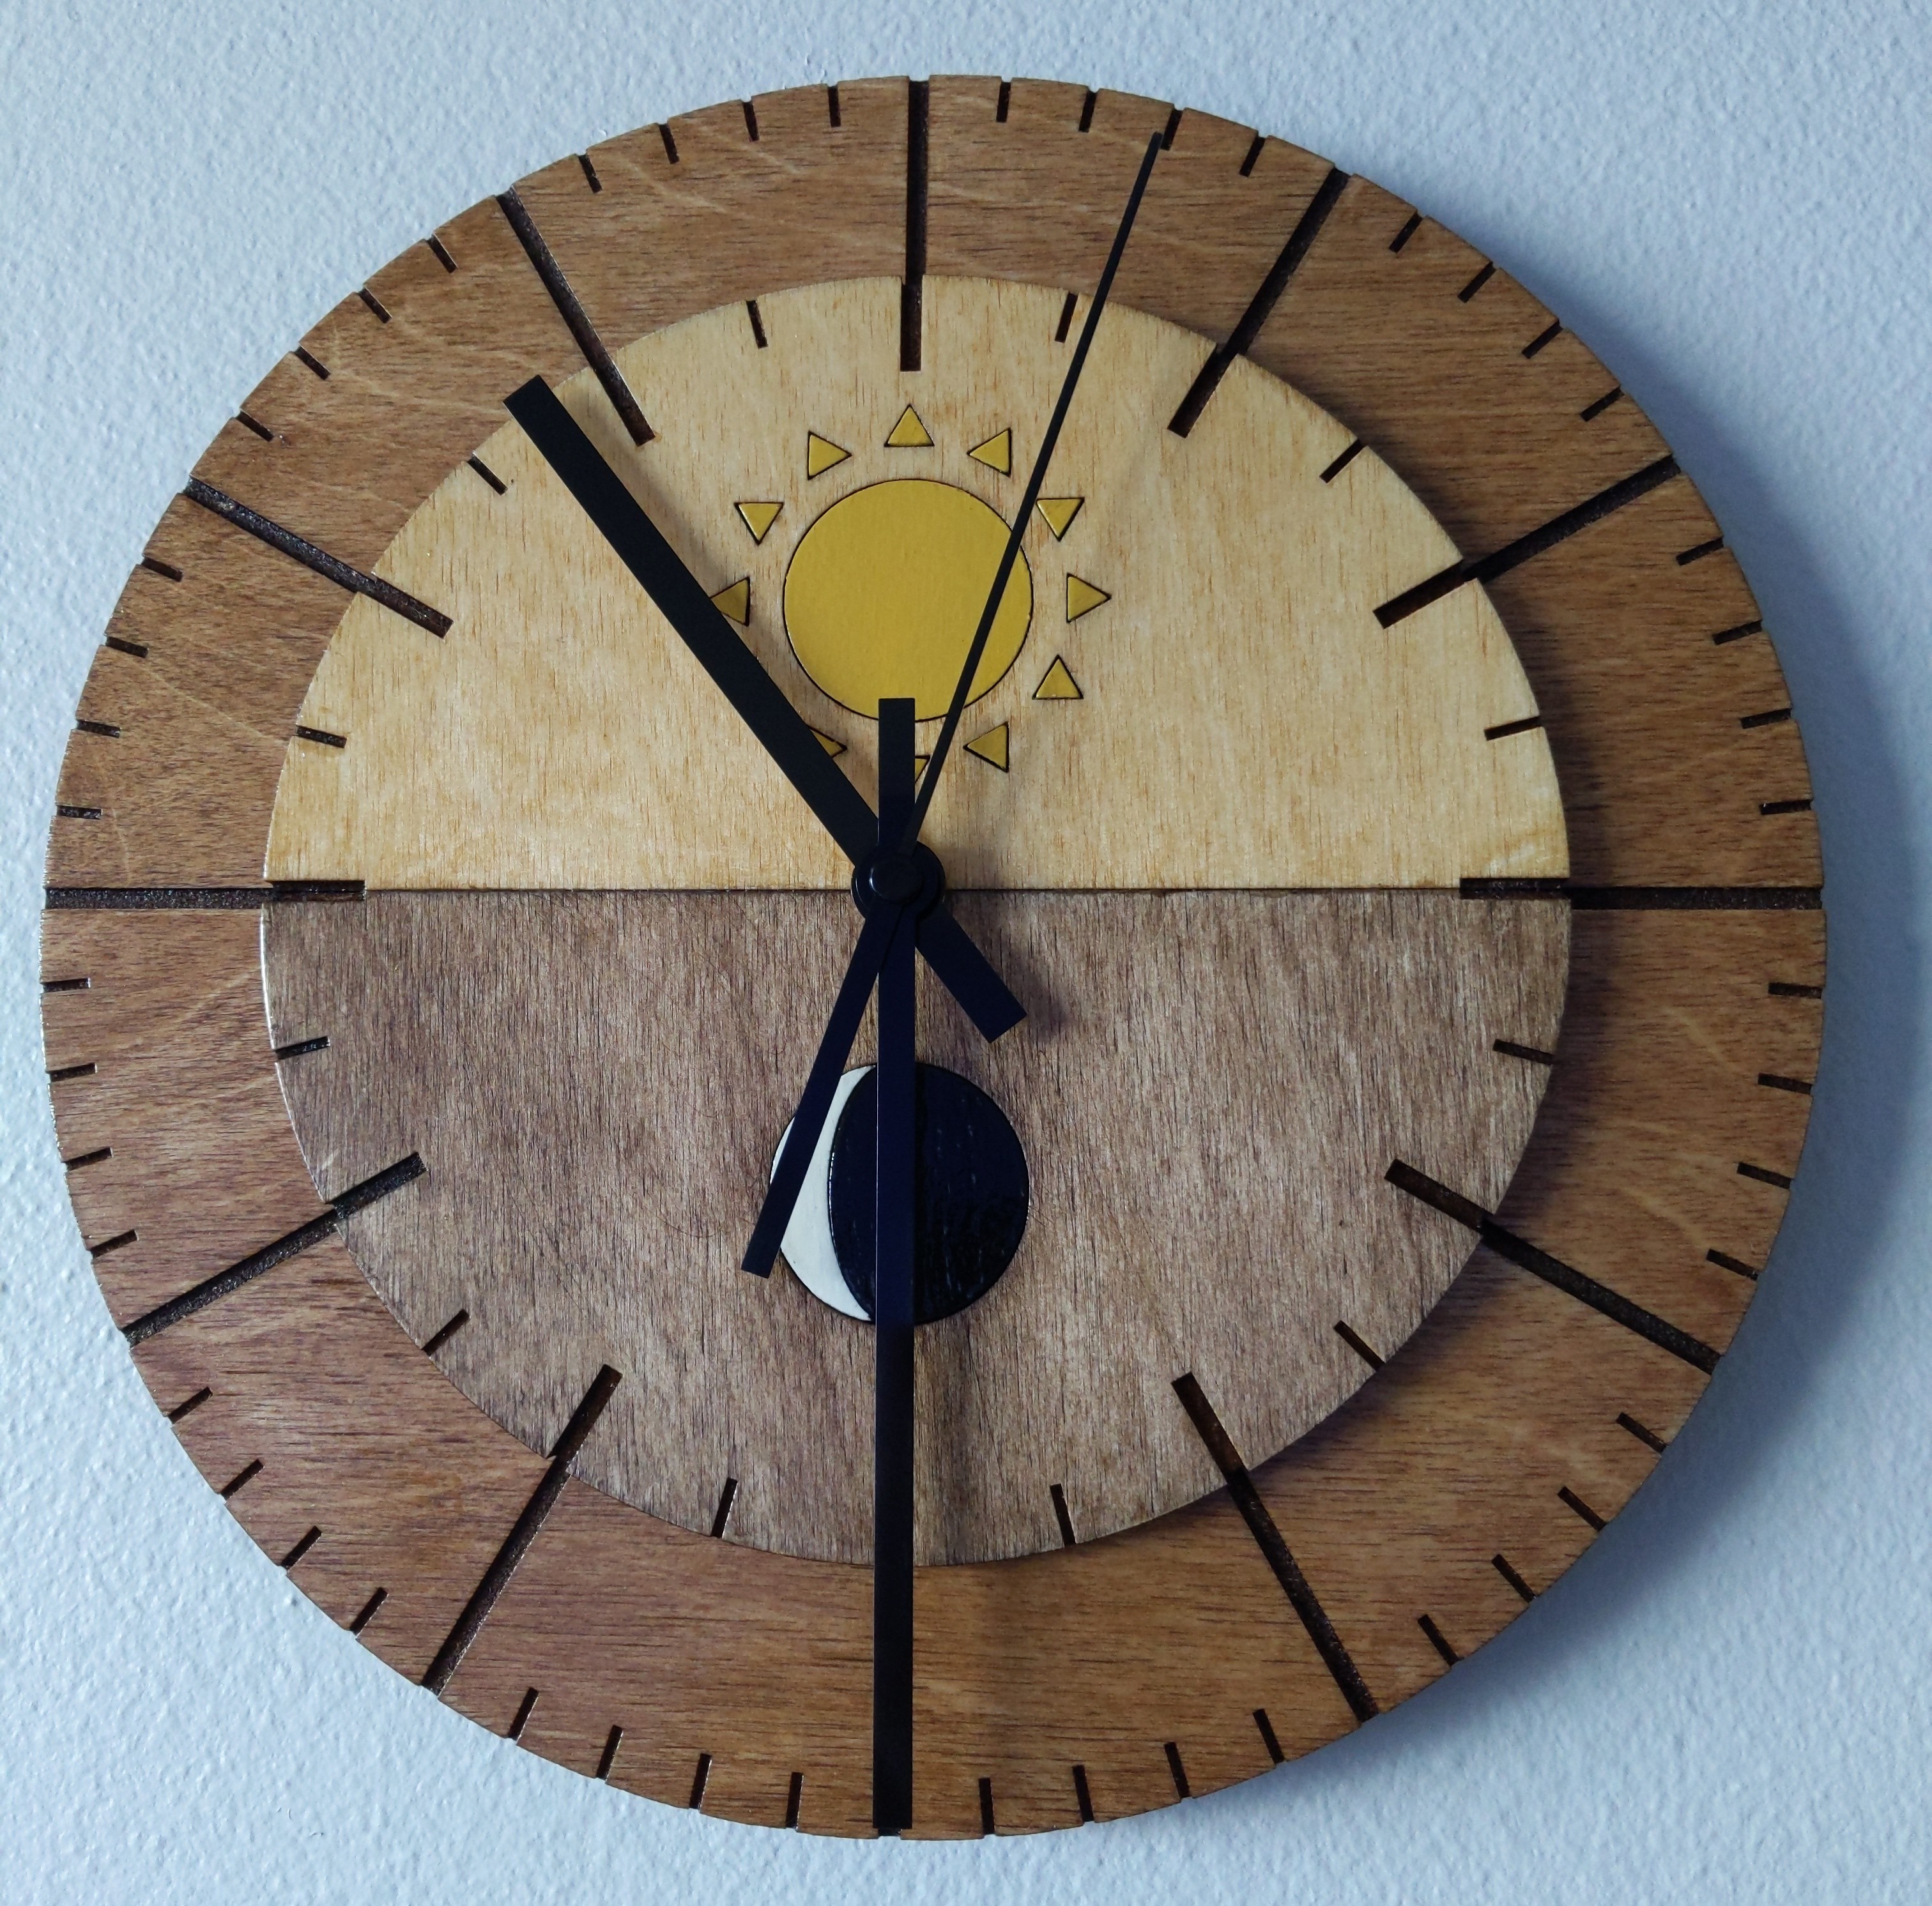 another finished clock